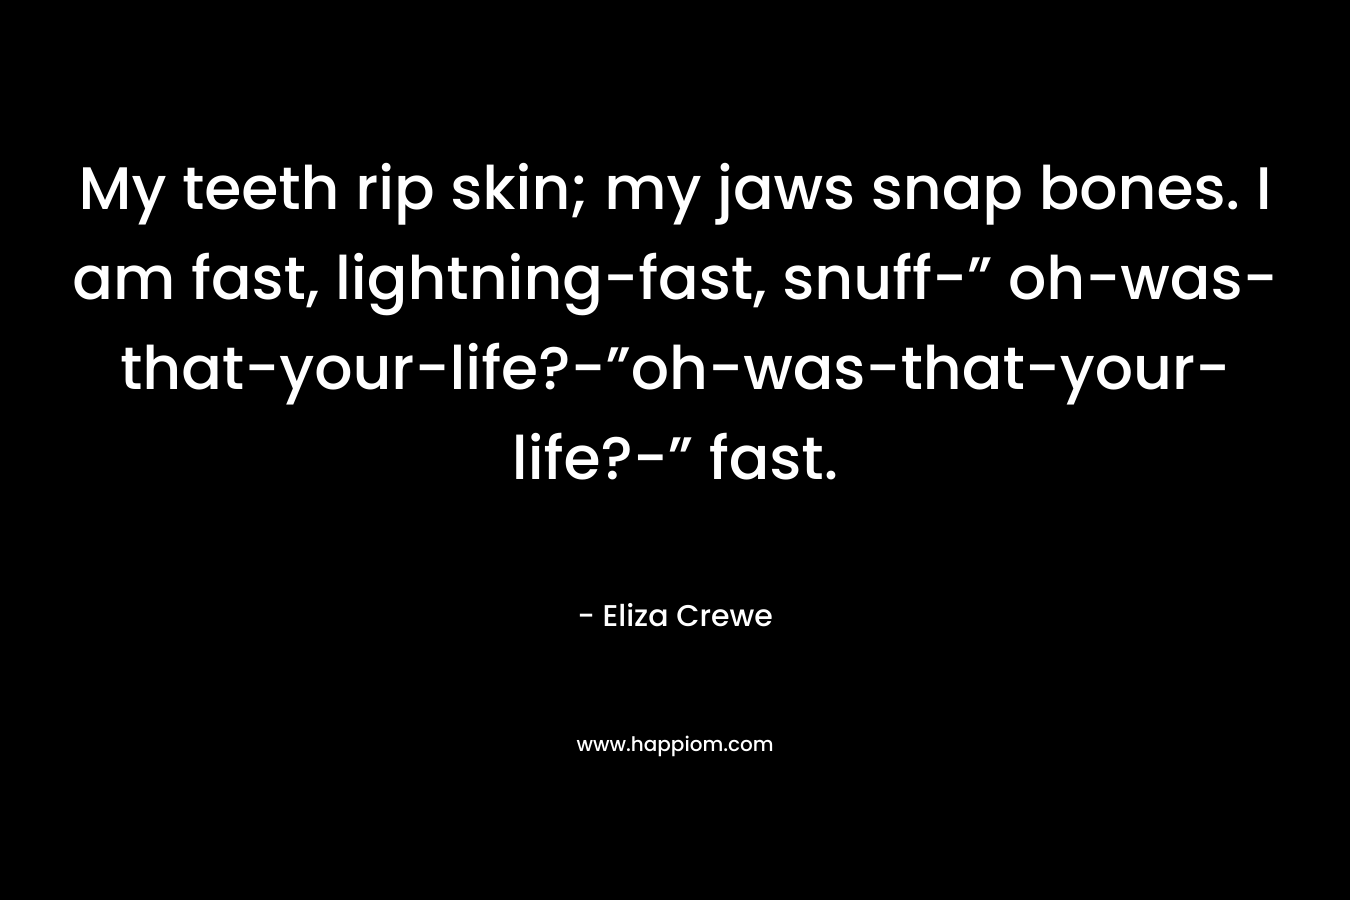 My teeth rip skin; my jaws snap bones. I am fast, lightning-fast, snuff-” oh-was-that-your-life?-”oh-was-that-your-life?-” fast.